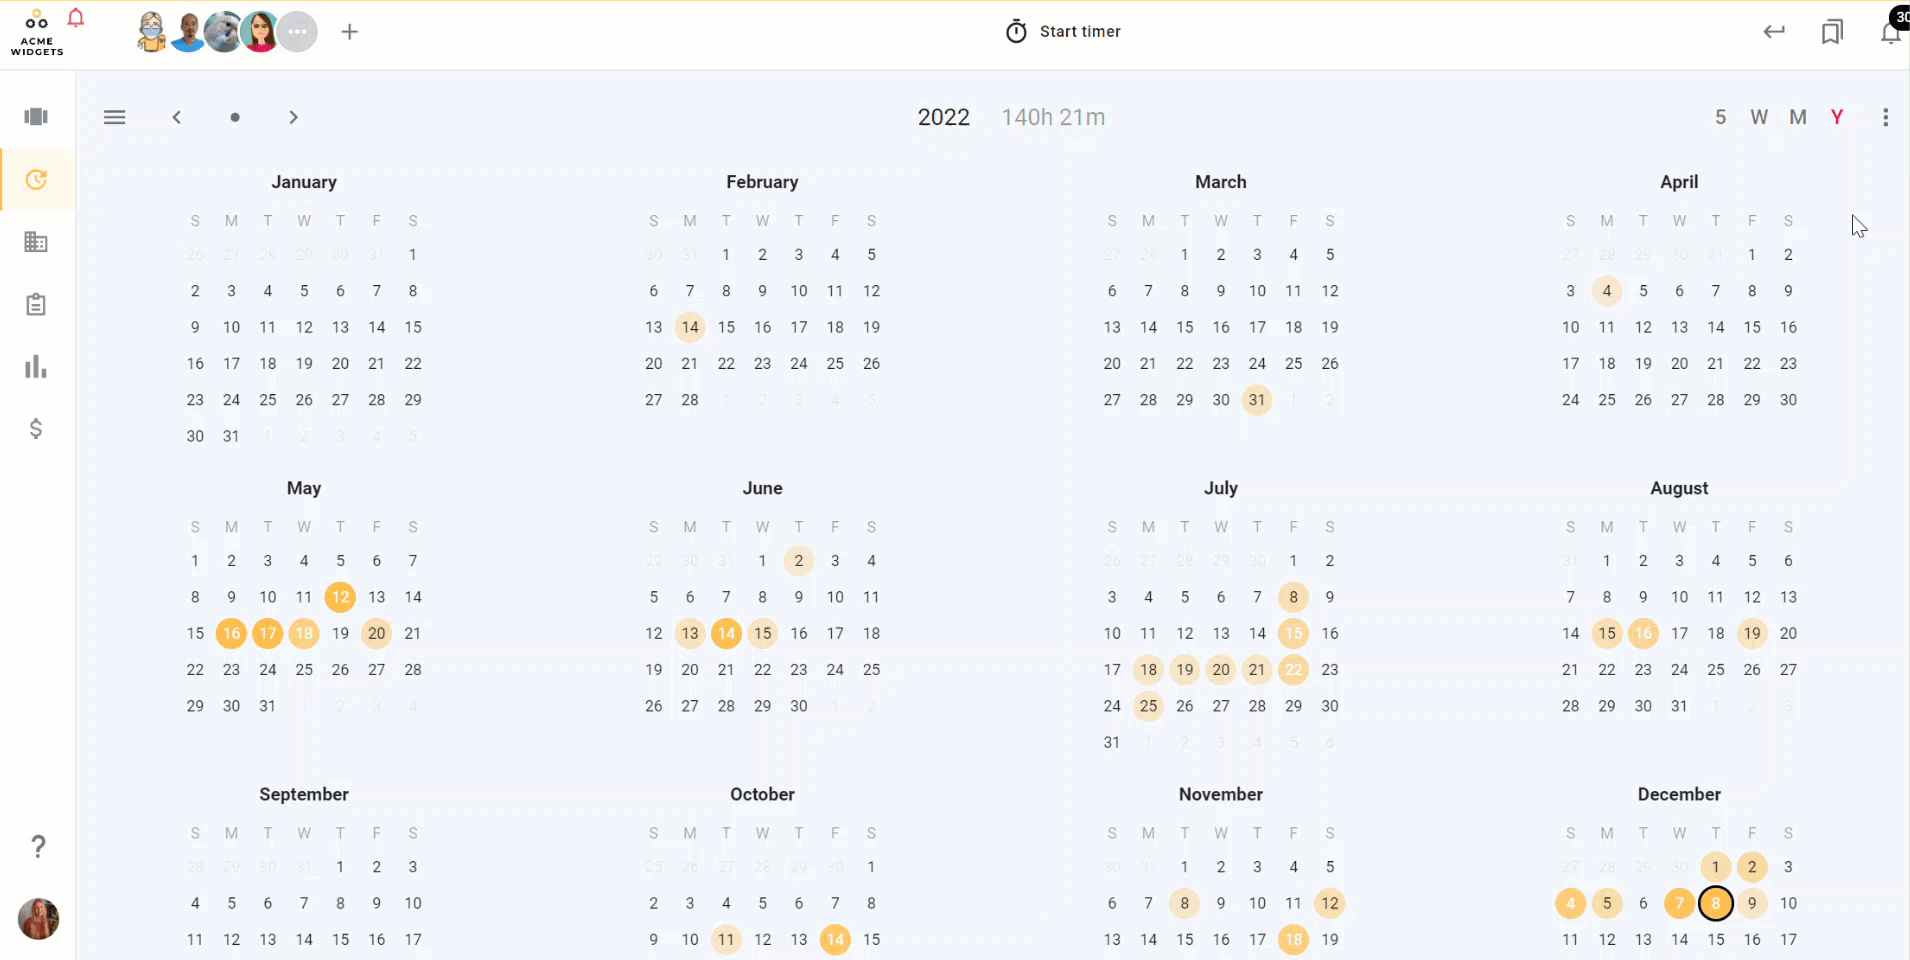 An animated GIF demonstrating the different calendar views a user can navigate to, including viewing any of their team member's calendar views.